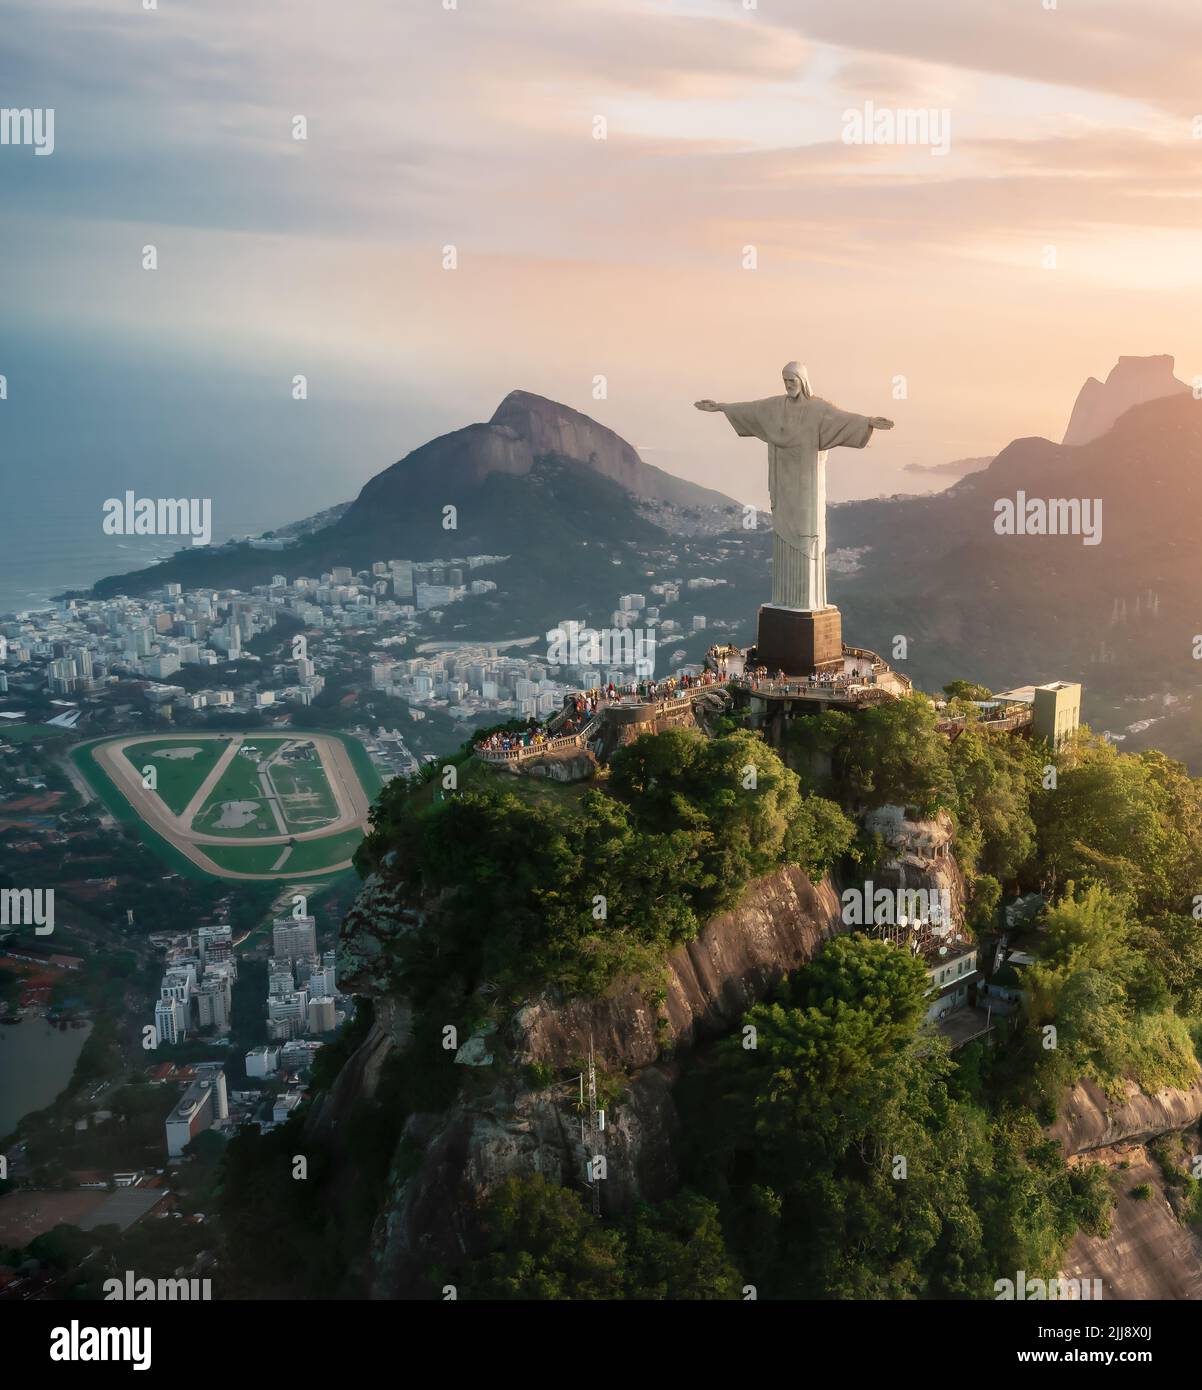 Aerial view of Christ the Redeemer Statue and Corcovado Mountain with Hipodromo da Gavea and Dois Irmaos Hill at sunset - Rio de Janeiro, Brazil Stock Photo